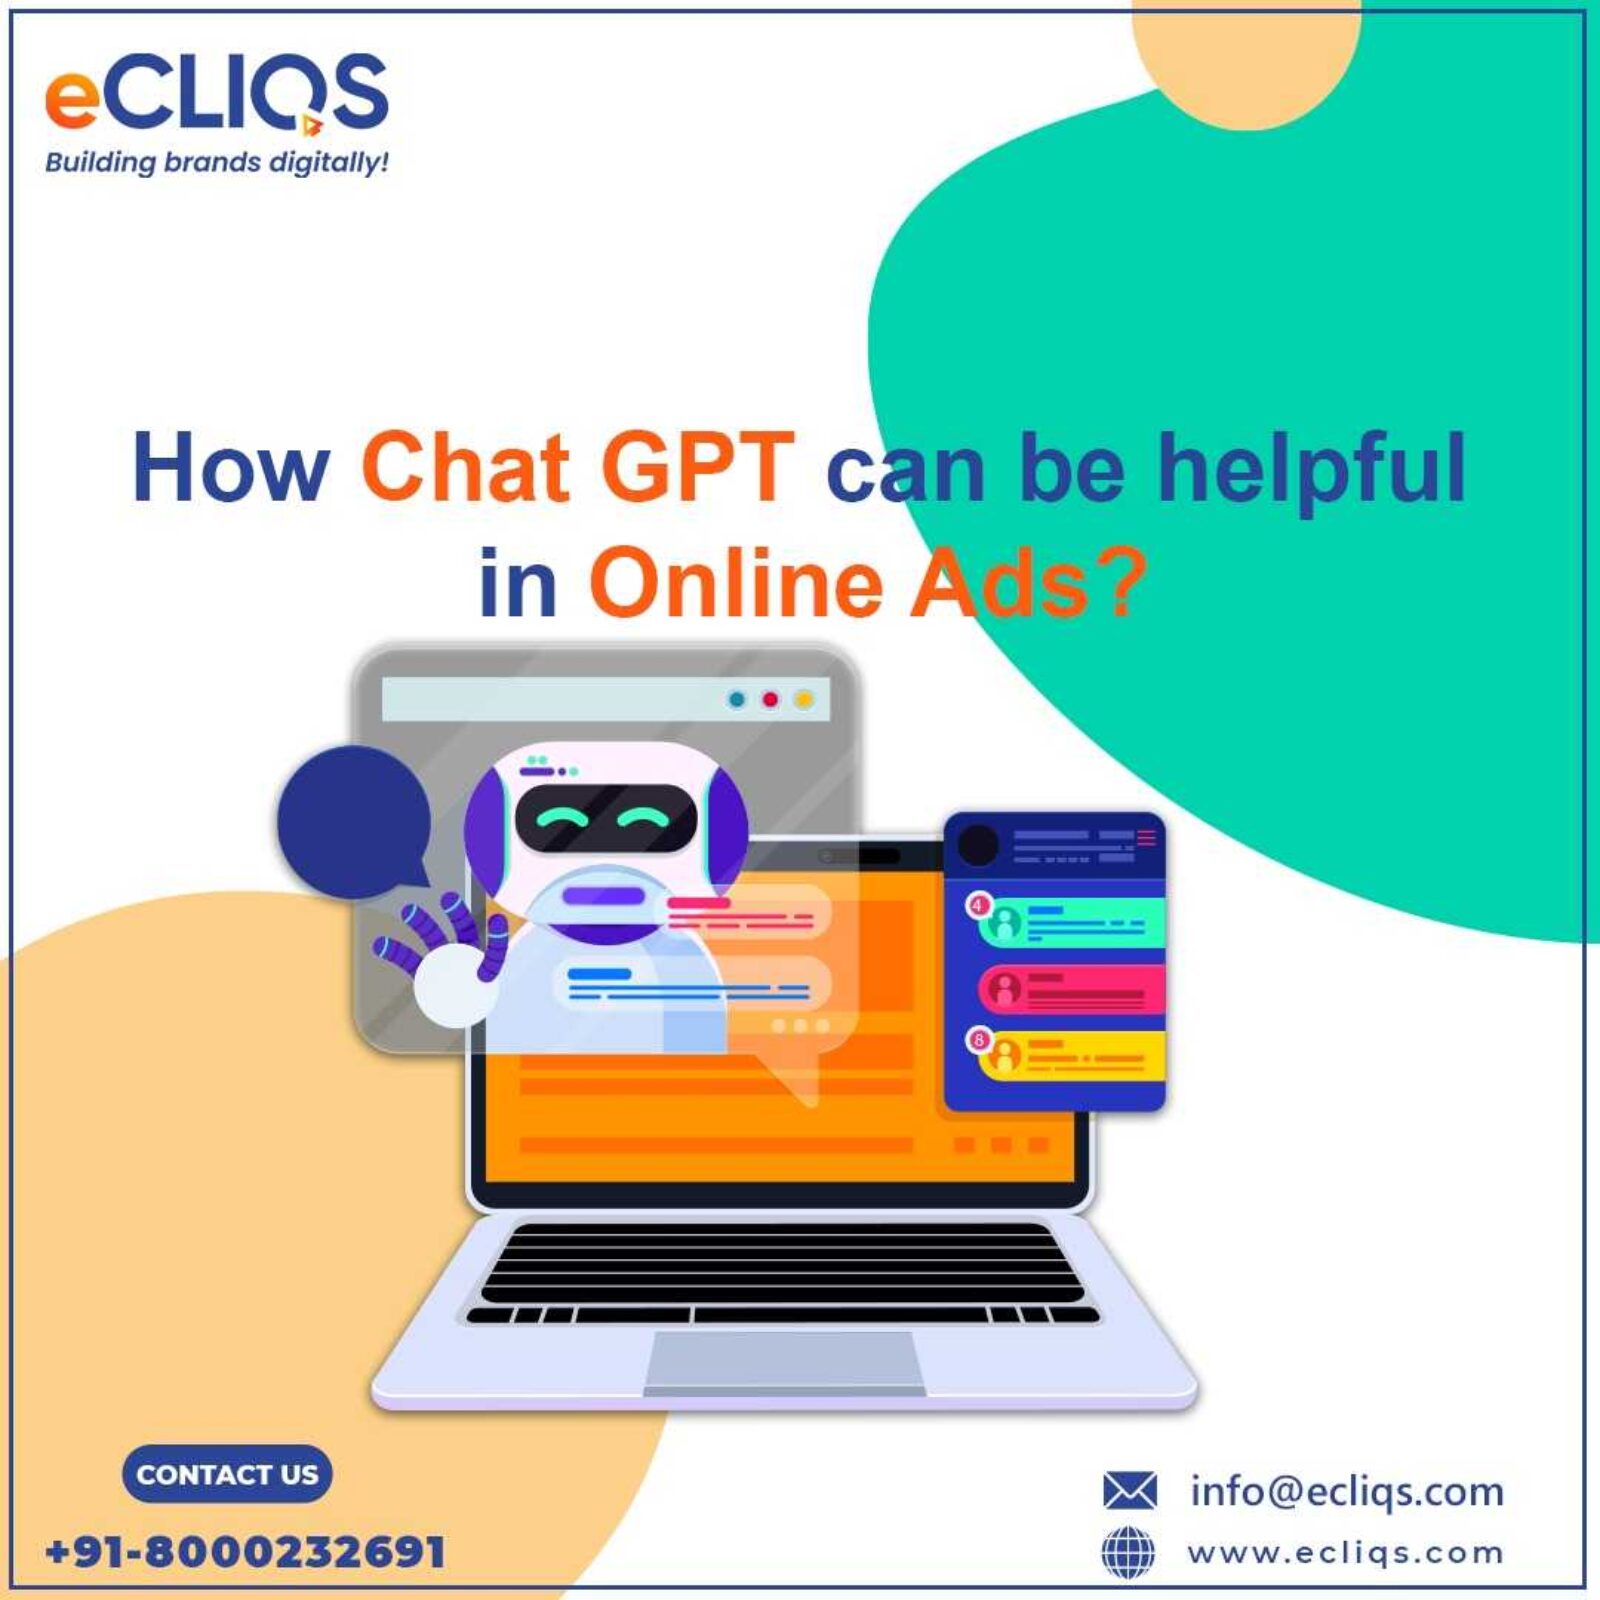 How Chat GPT helps in Online Ads?